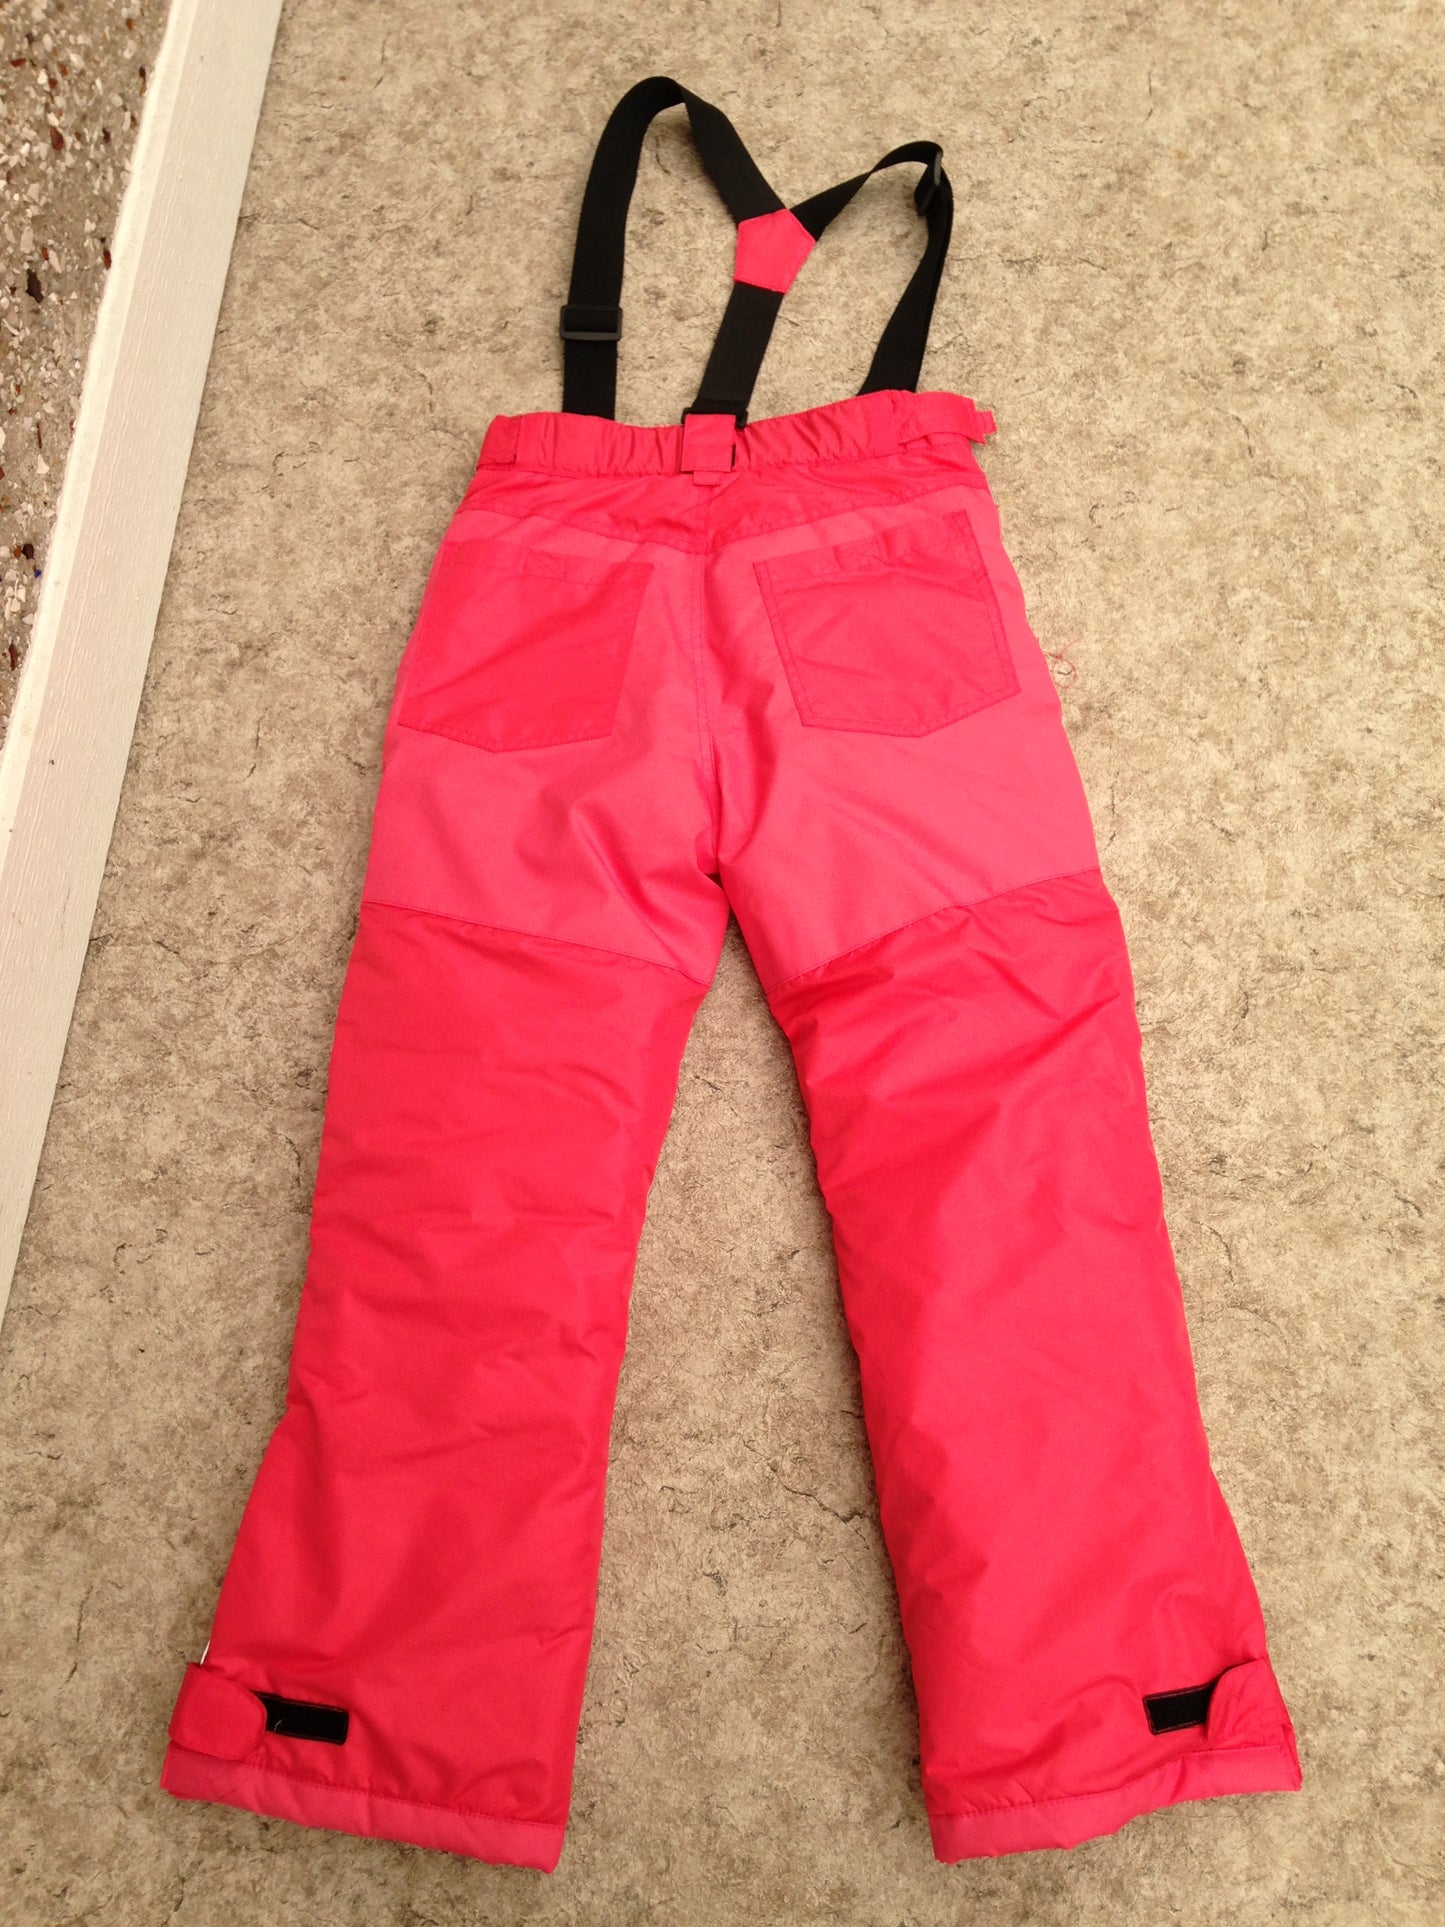 Snow Pants Child Size 10-12 Alpine Coral With Removeable Straps New Demo Model